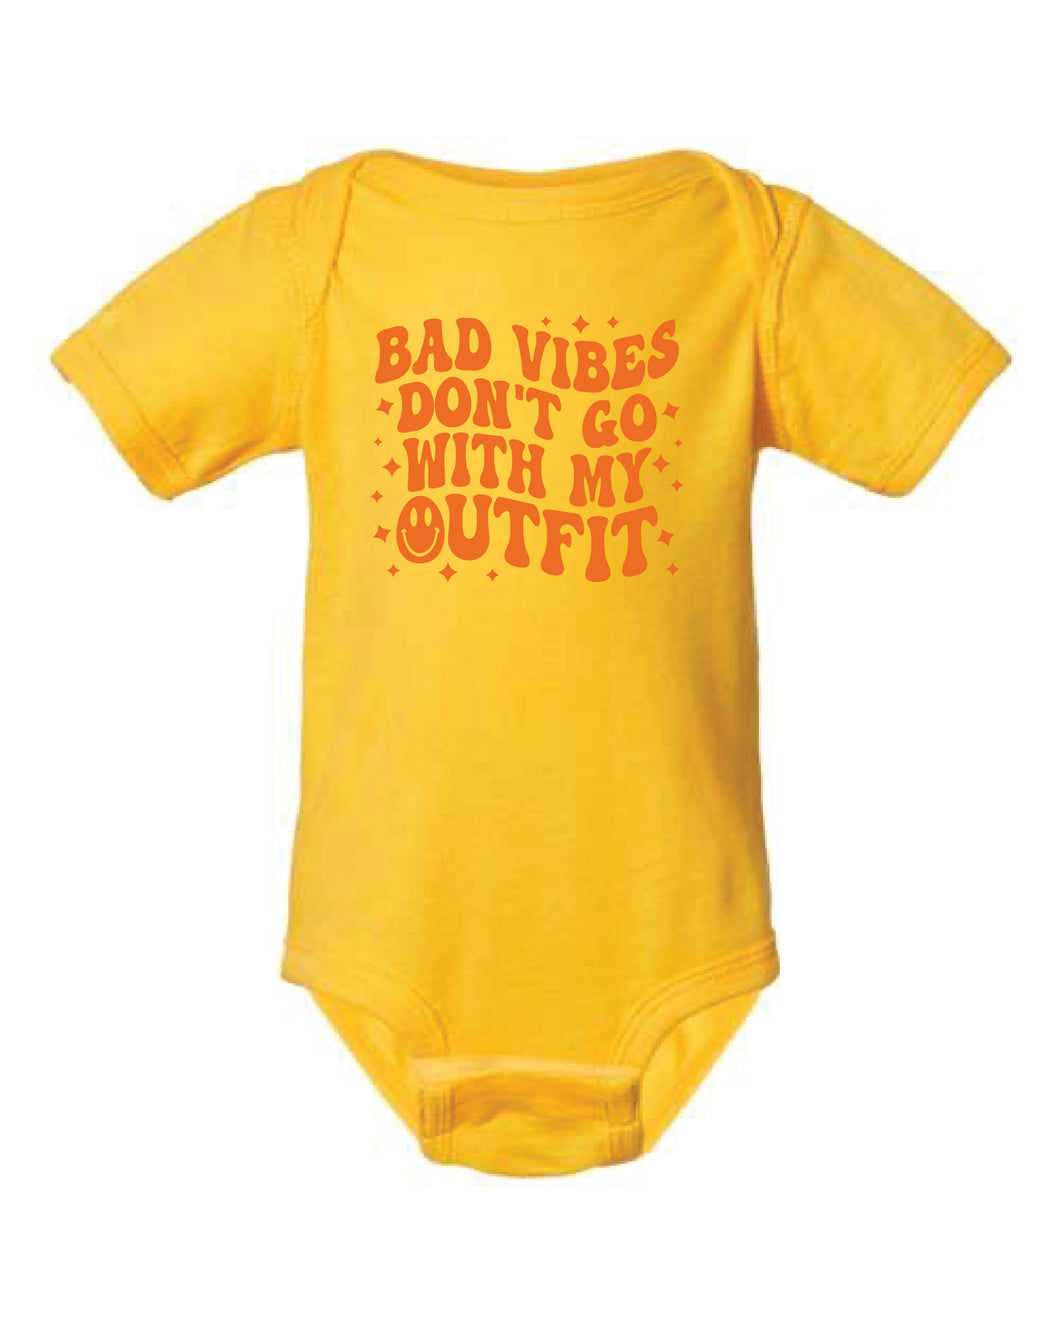 Bad Vibes Don't Go With My Outfit INFANT New